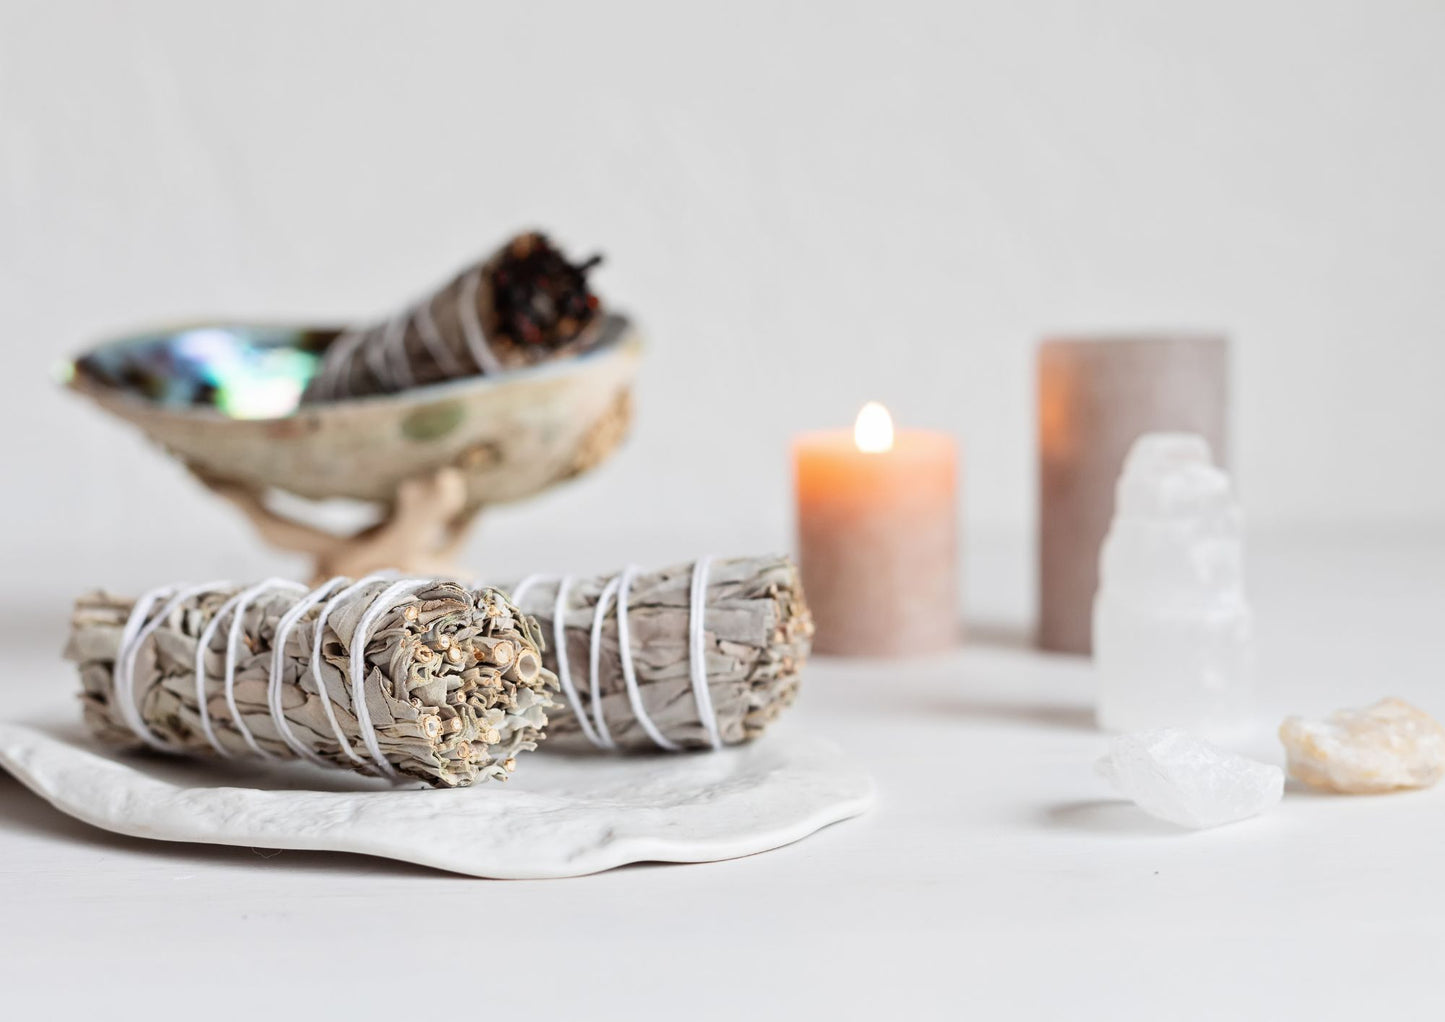 Twin Pack of White Sage Smudge Sticks for Spiritual Cleansing